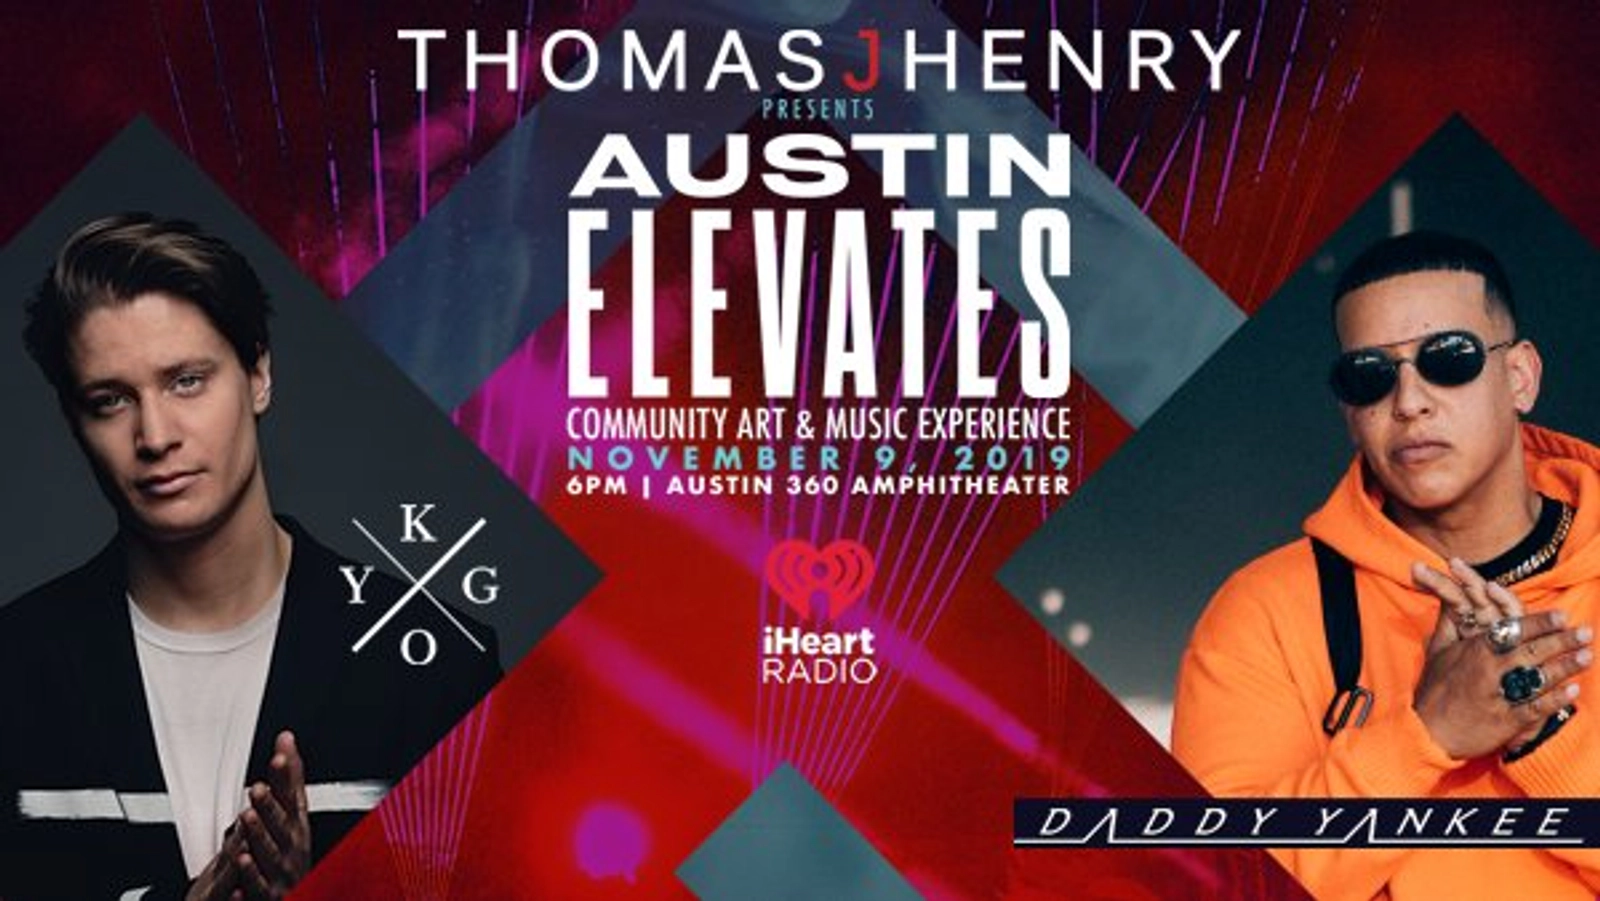 Enter To Win VIP Tickets To Austin Elevates Presented By Thomas J Henry - Thumbnail Image